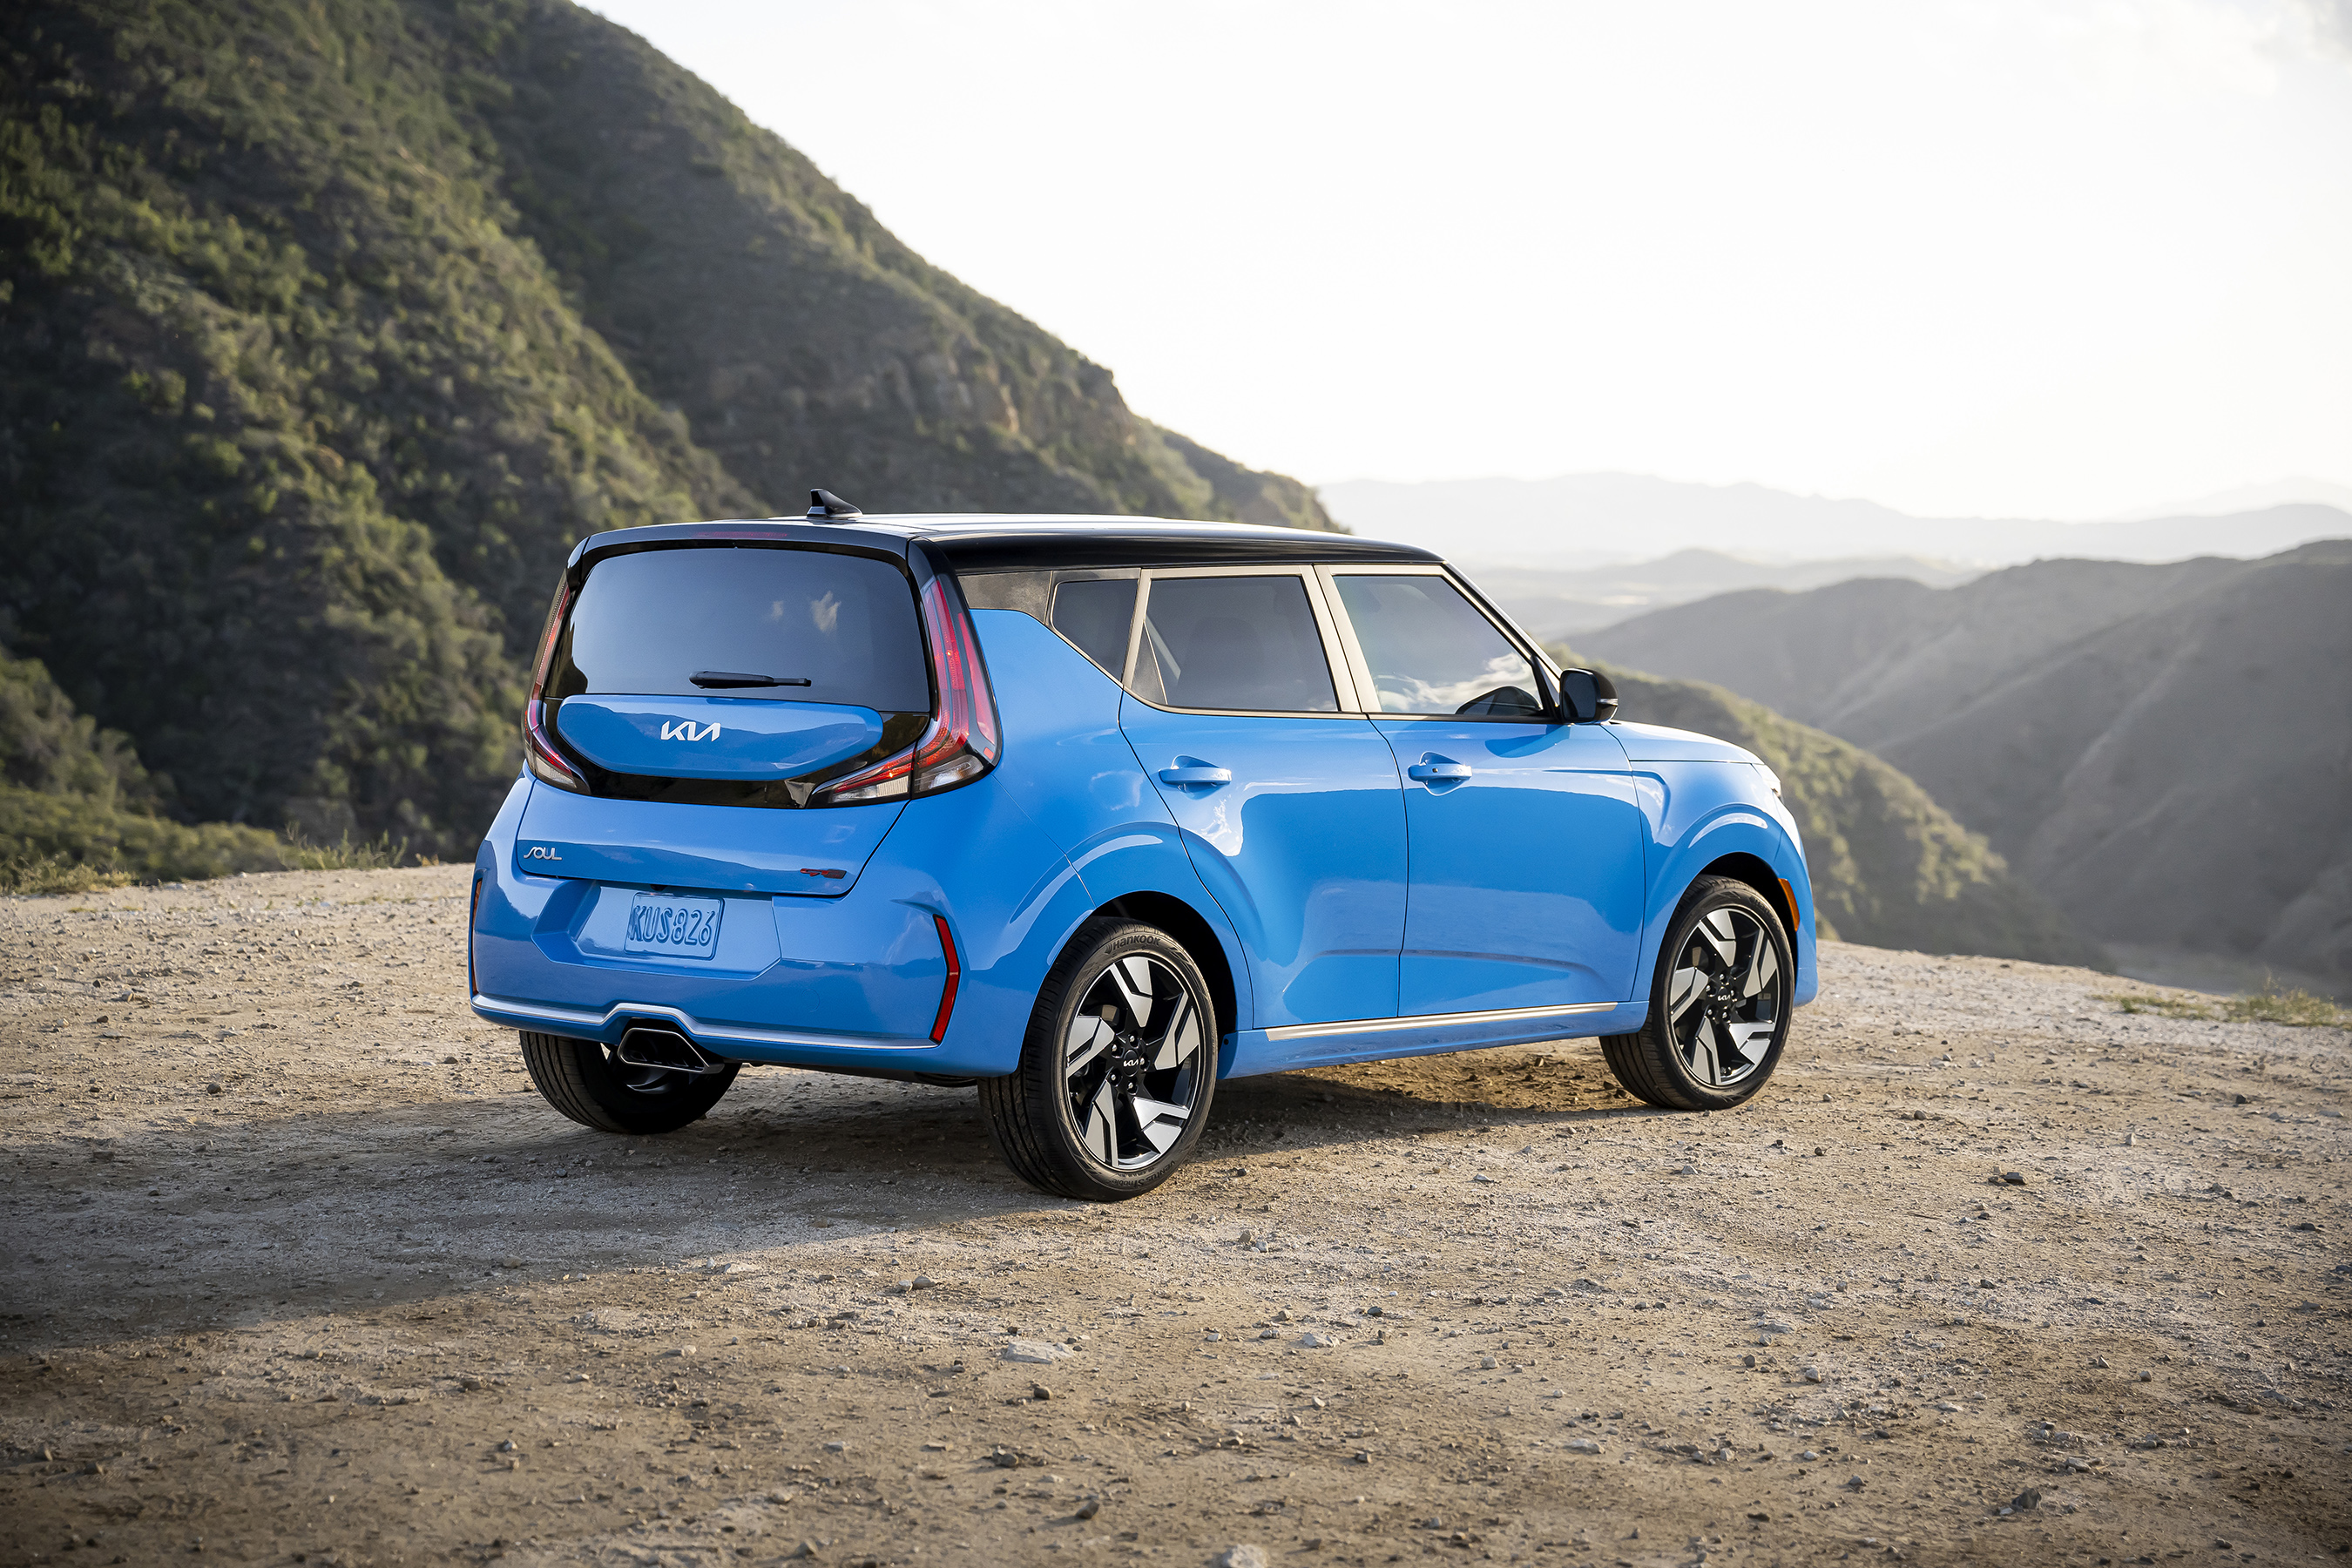 Kia’s Soul has always been set apart by its bold yet functional design, the 2023 model year continues the tradition with notable front and rear design enhancements.